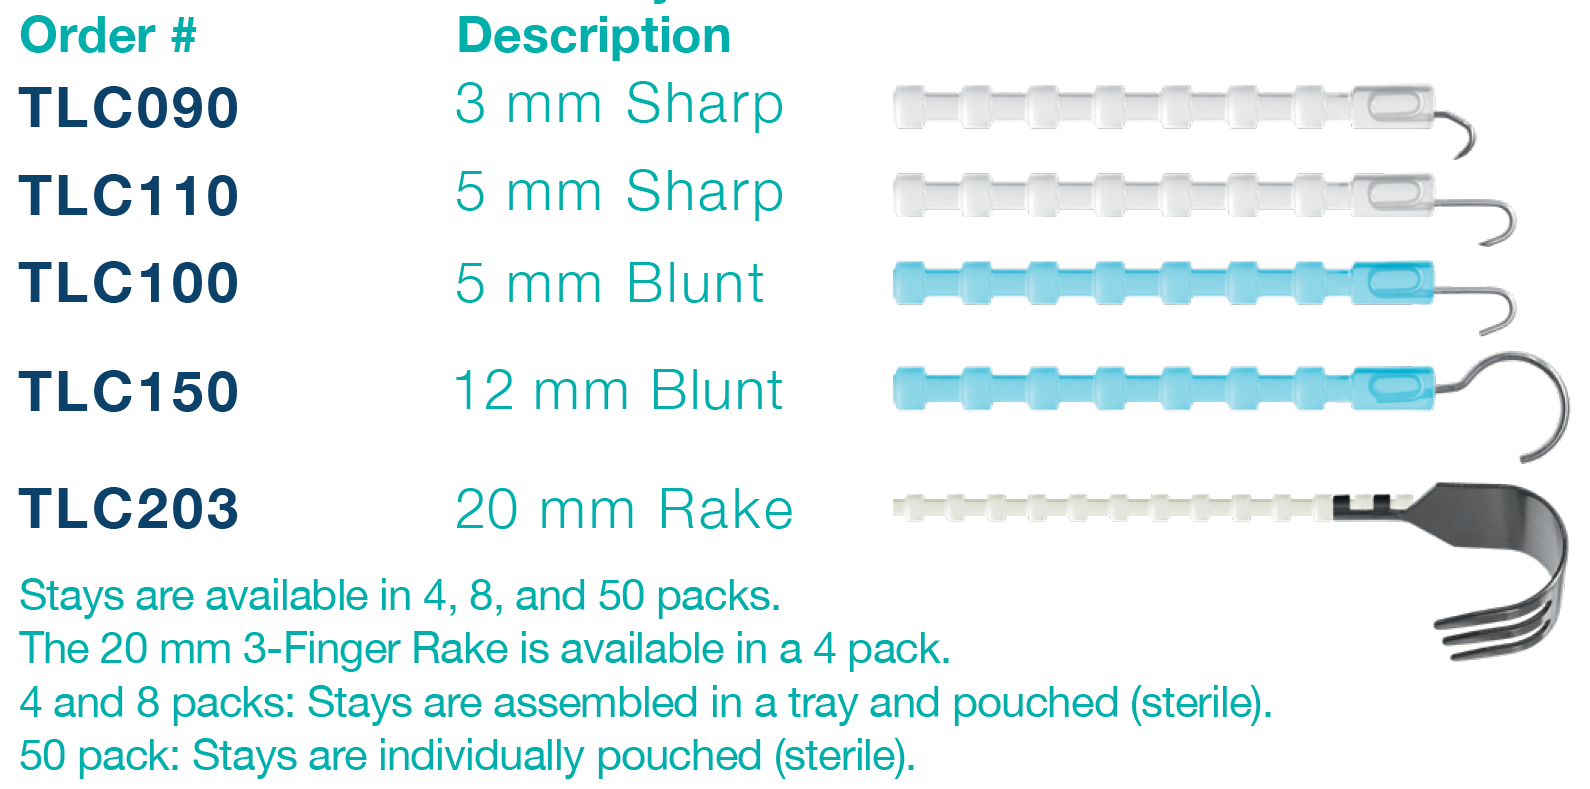 Applied Medical Technology|AMT Surgical Kits